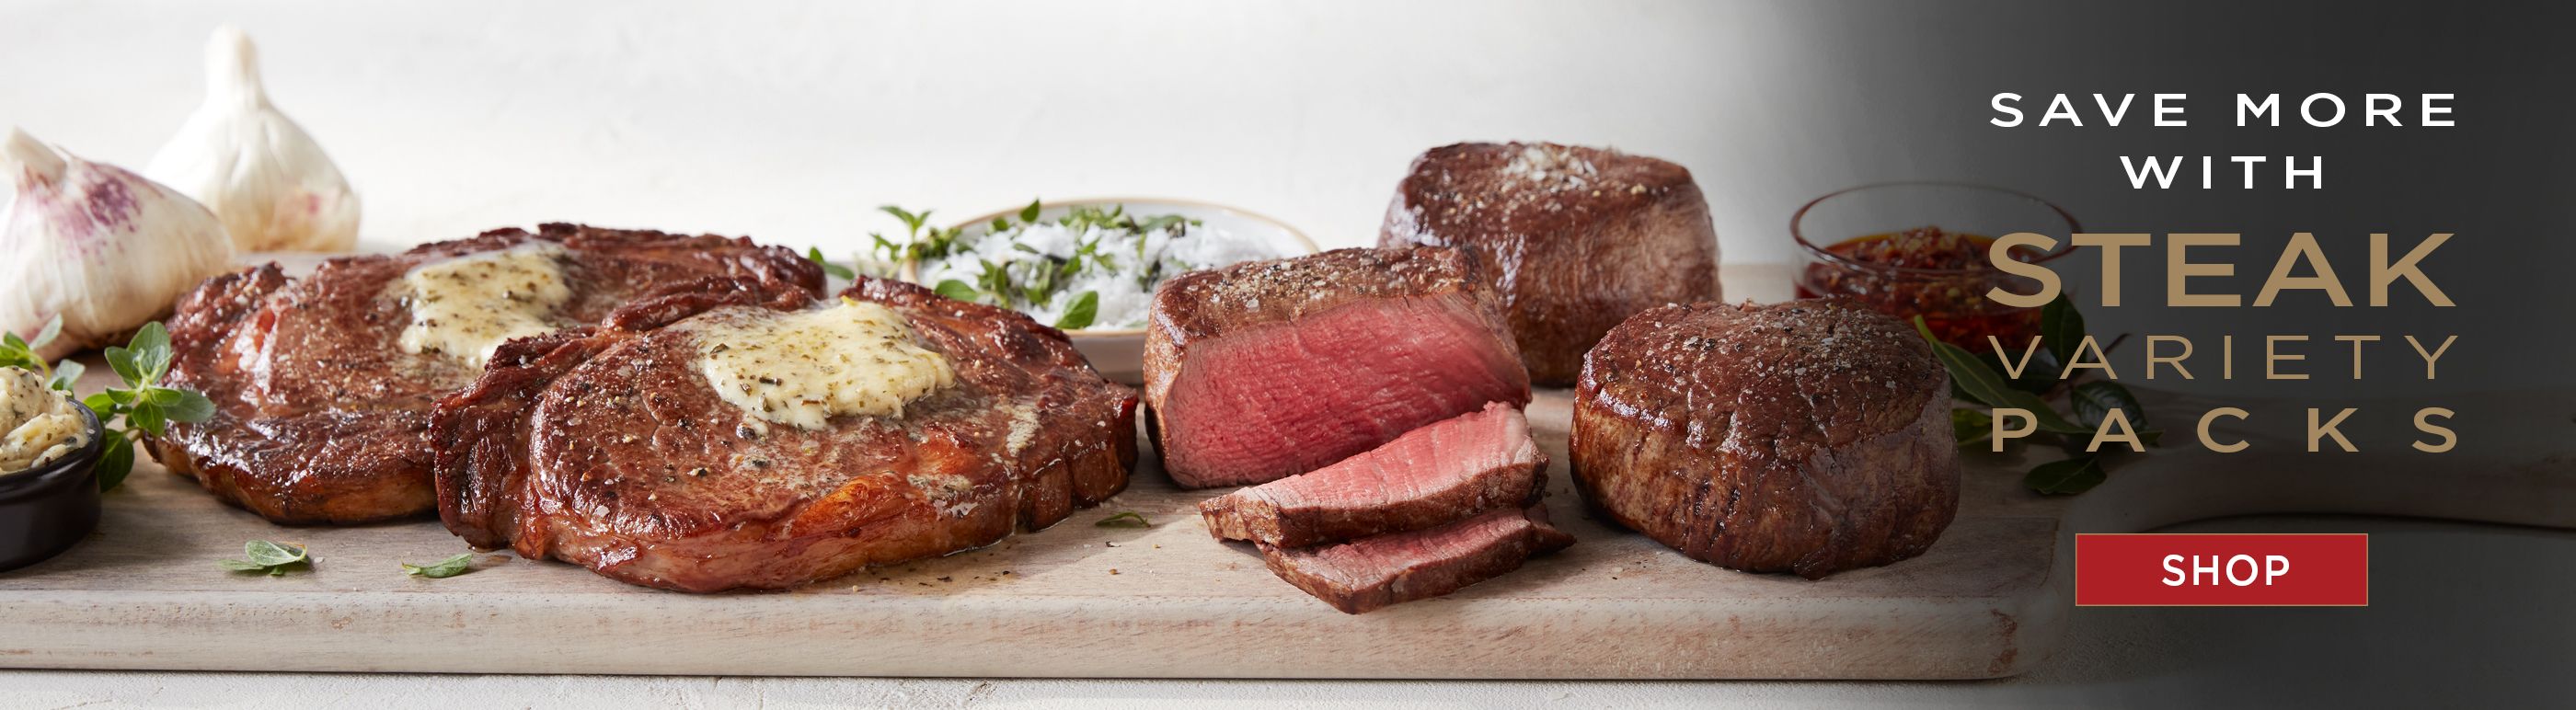 Save more with steak variety packs.